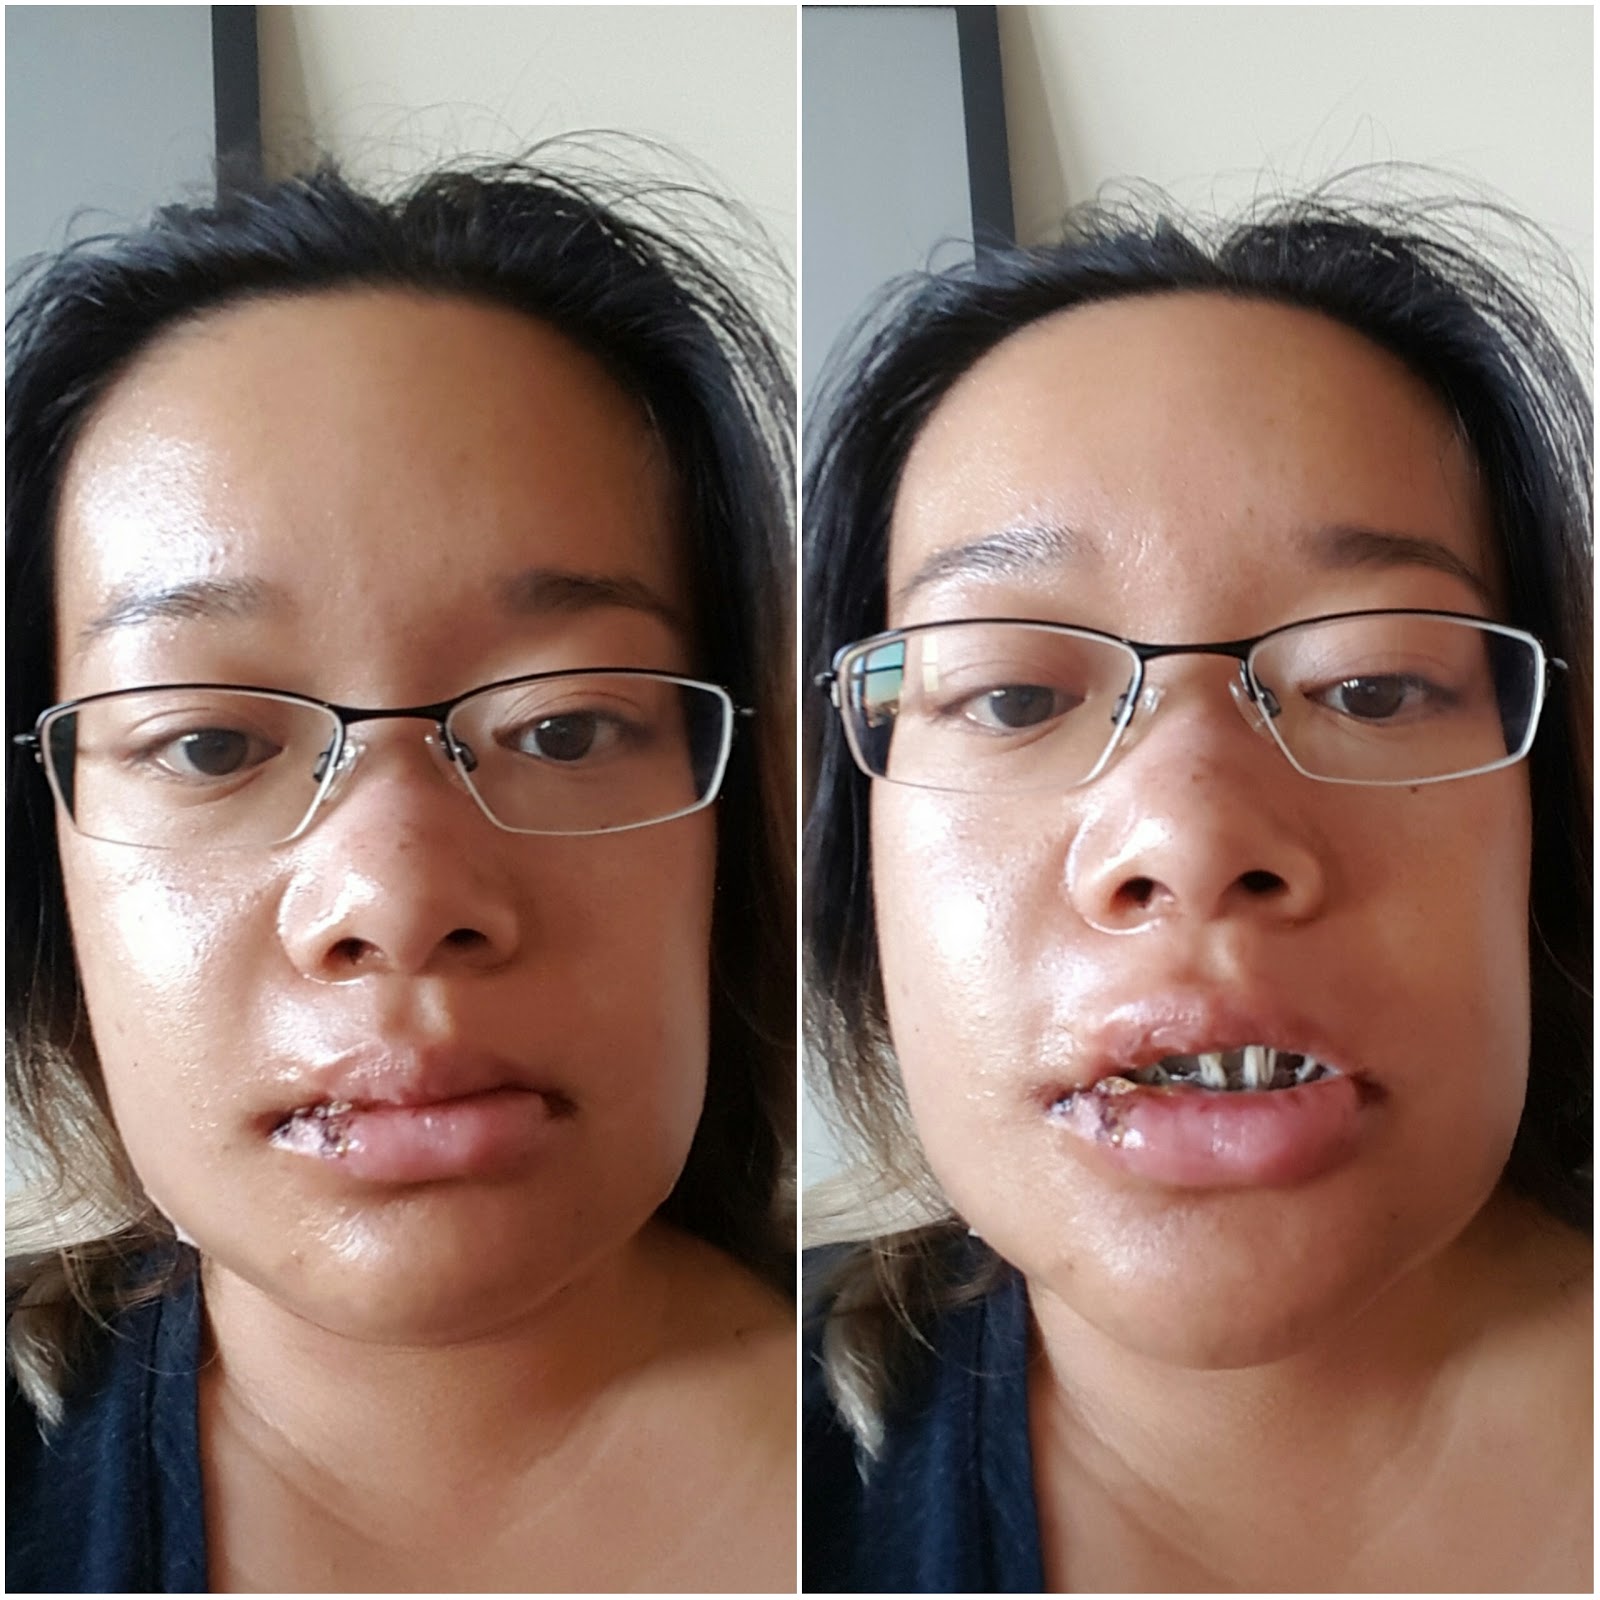 Tinas Double Jaw Surgery Day 2 Swelling Increasing Happy Halloween